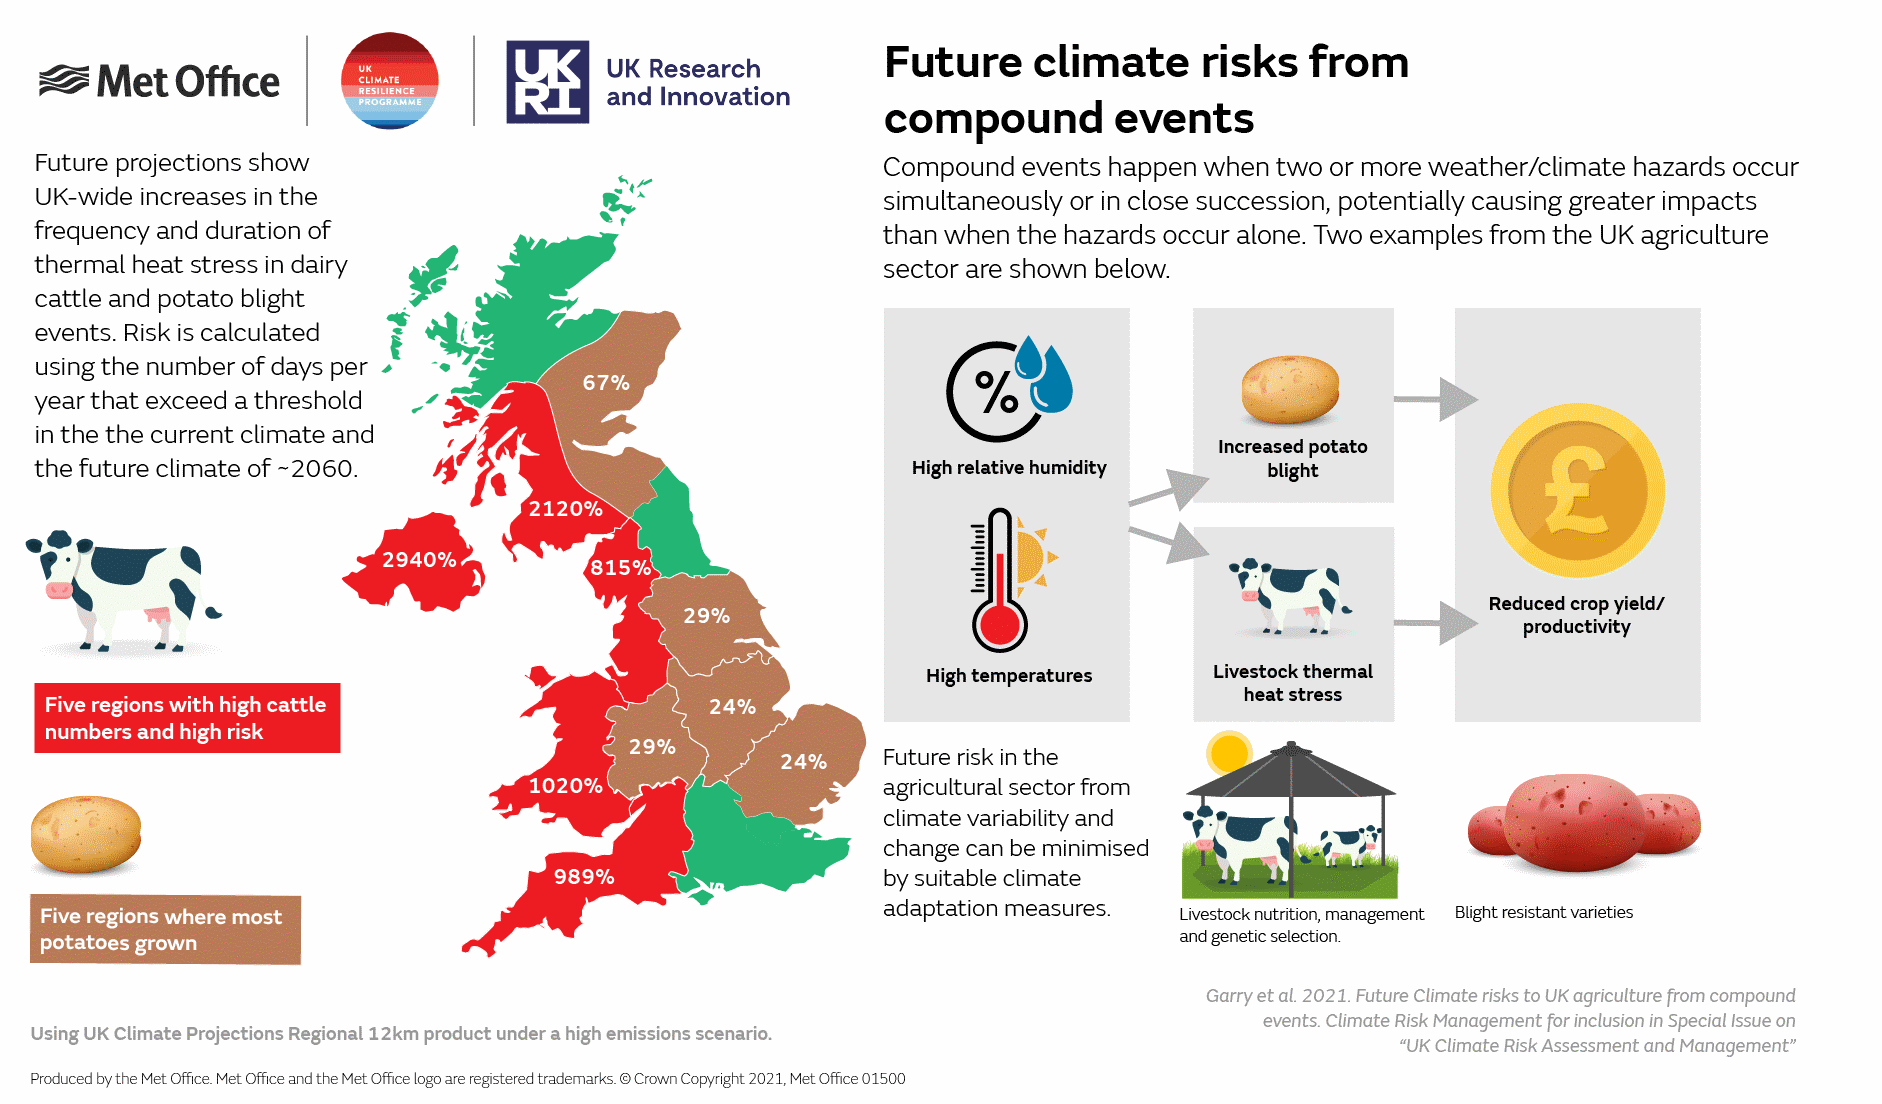 The effects of climate change on key sectors of UK agriculture